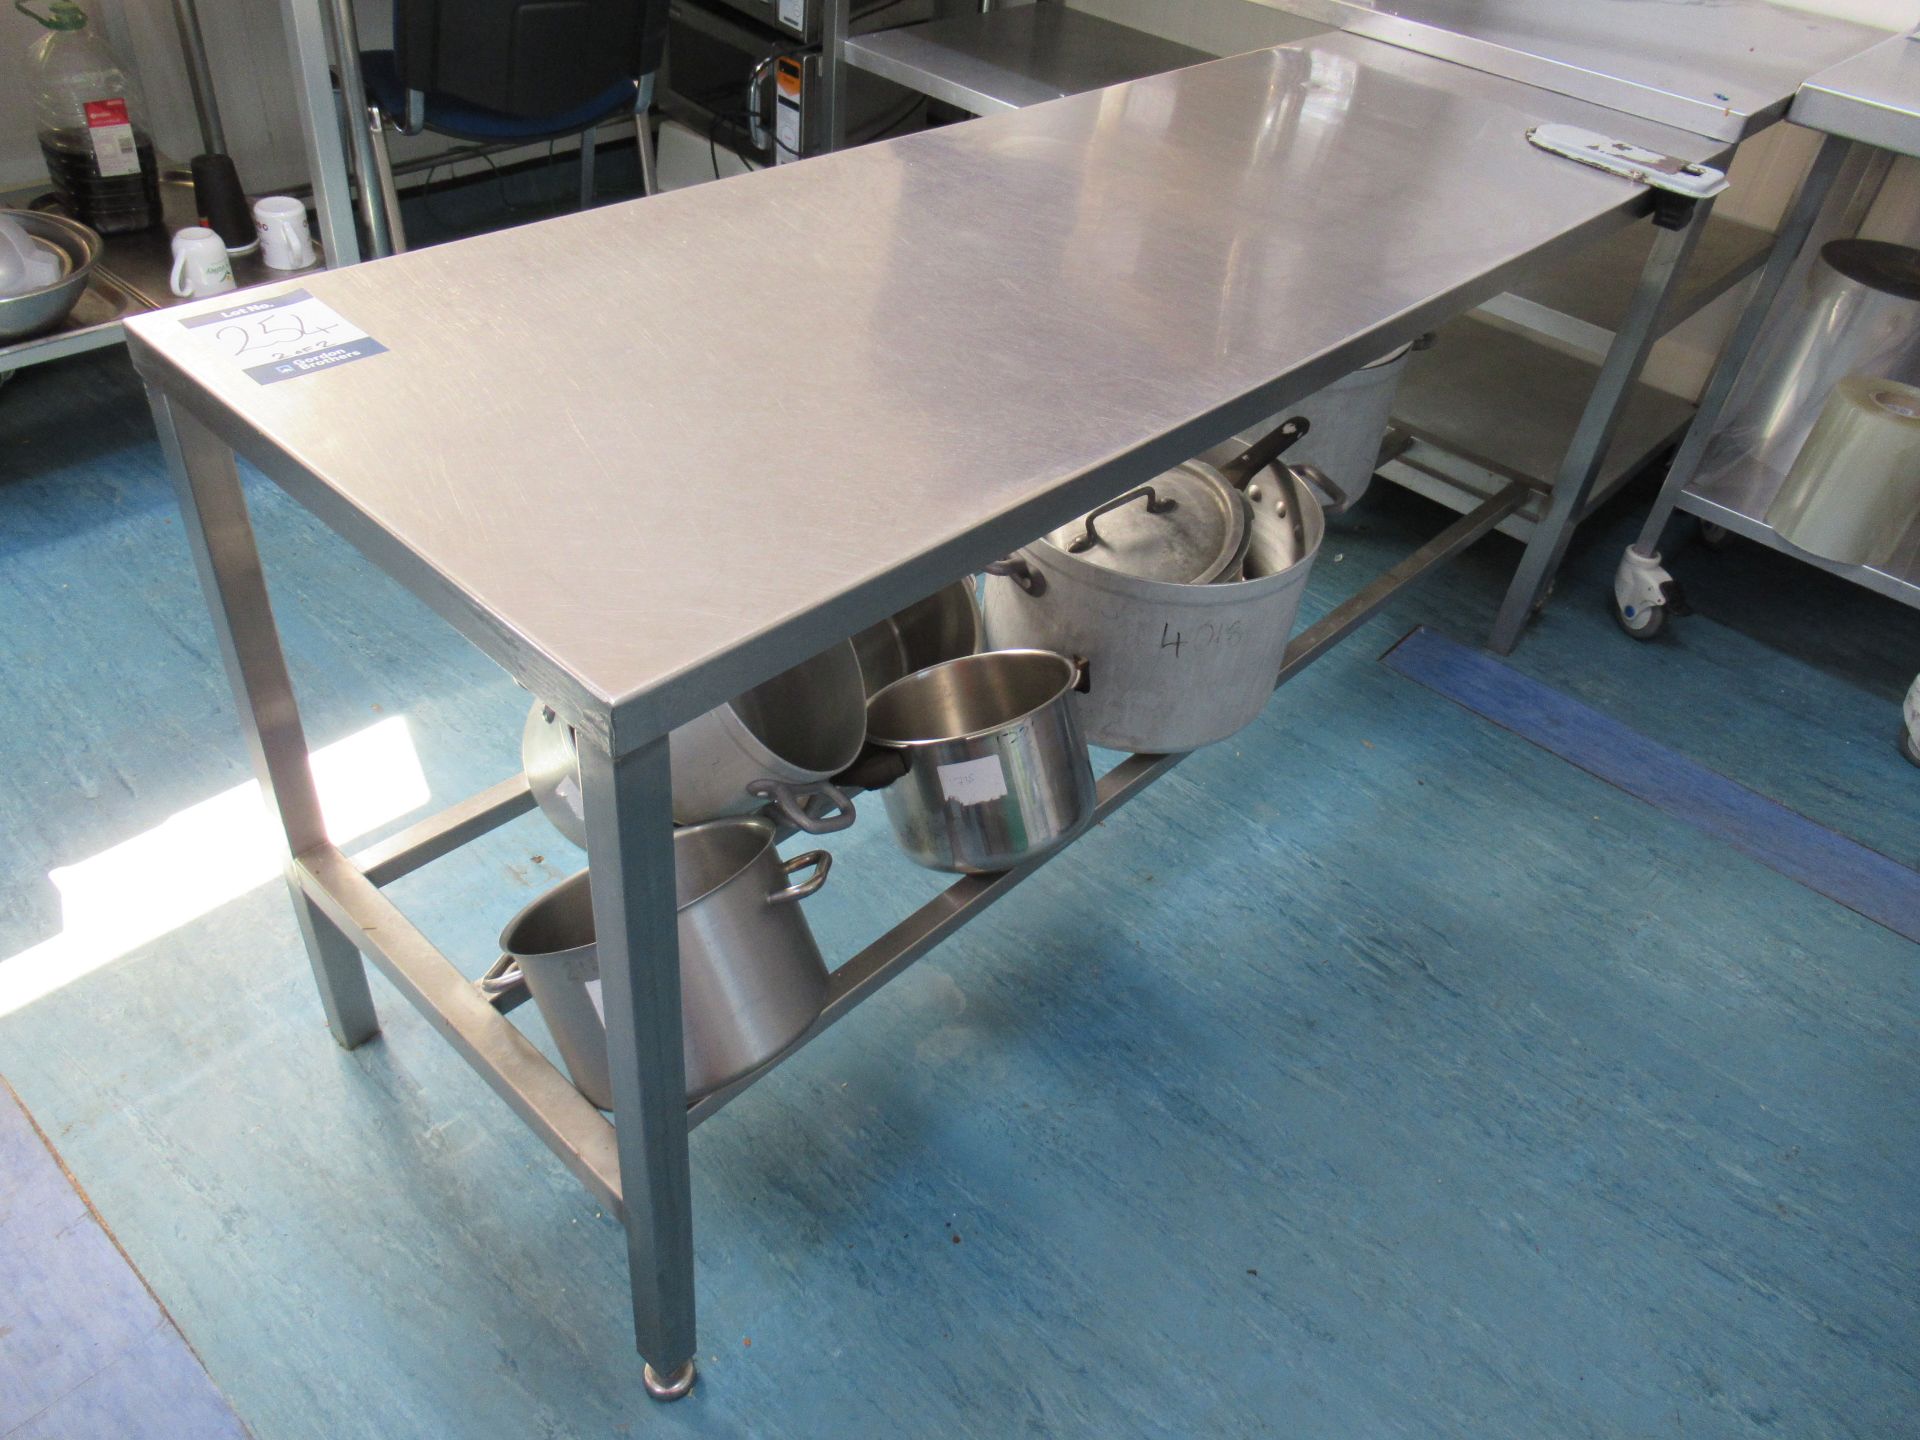 2 Stainless steel tables with 1800 x 600mm work surfaces, one with aluminium frame